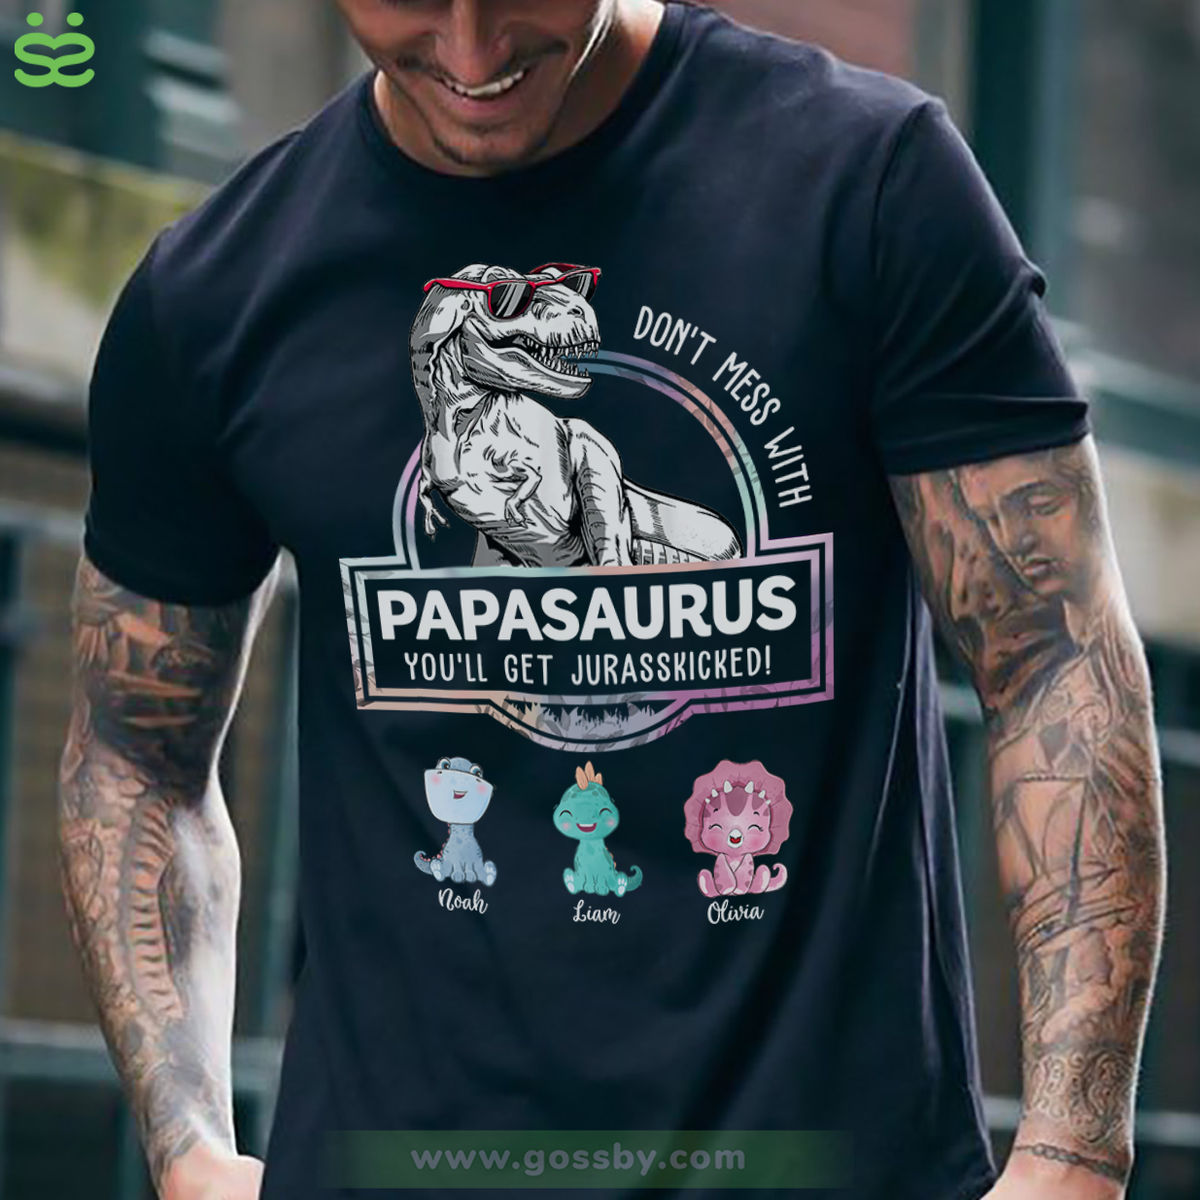 Personalized Shirt - Funny Tee - Don't Mess With Papasaurus - Black